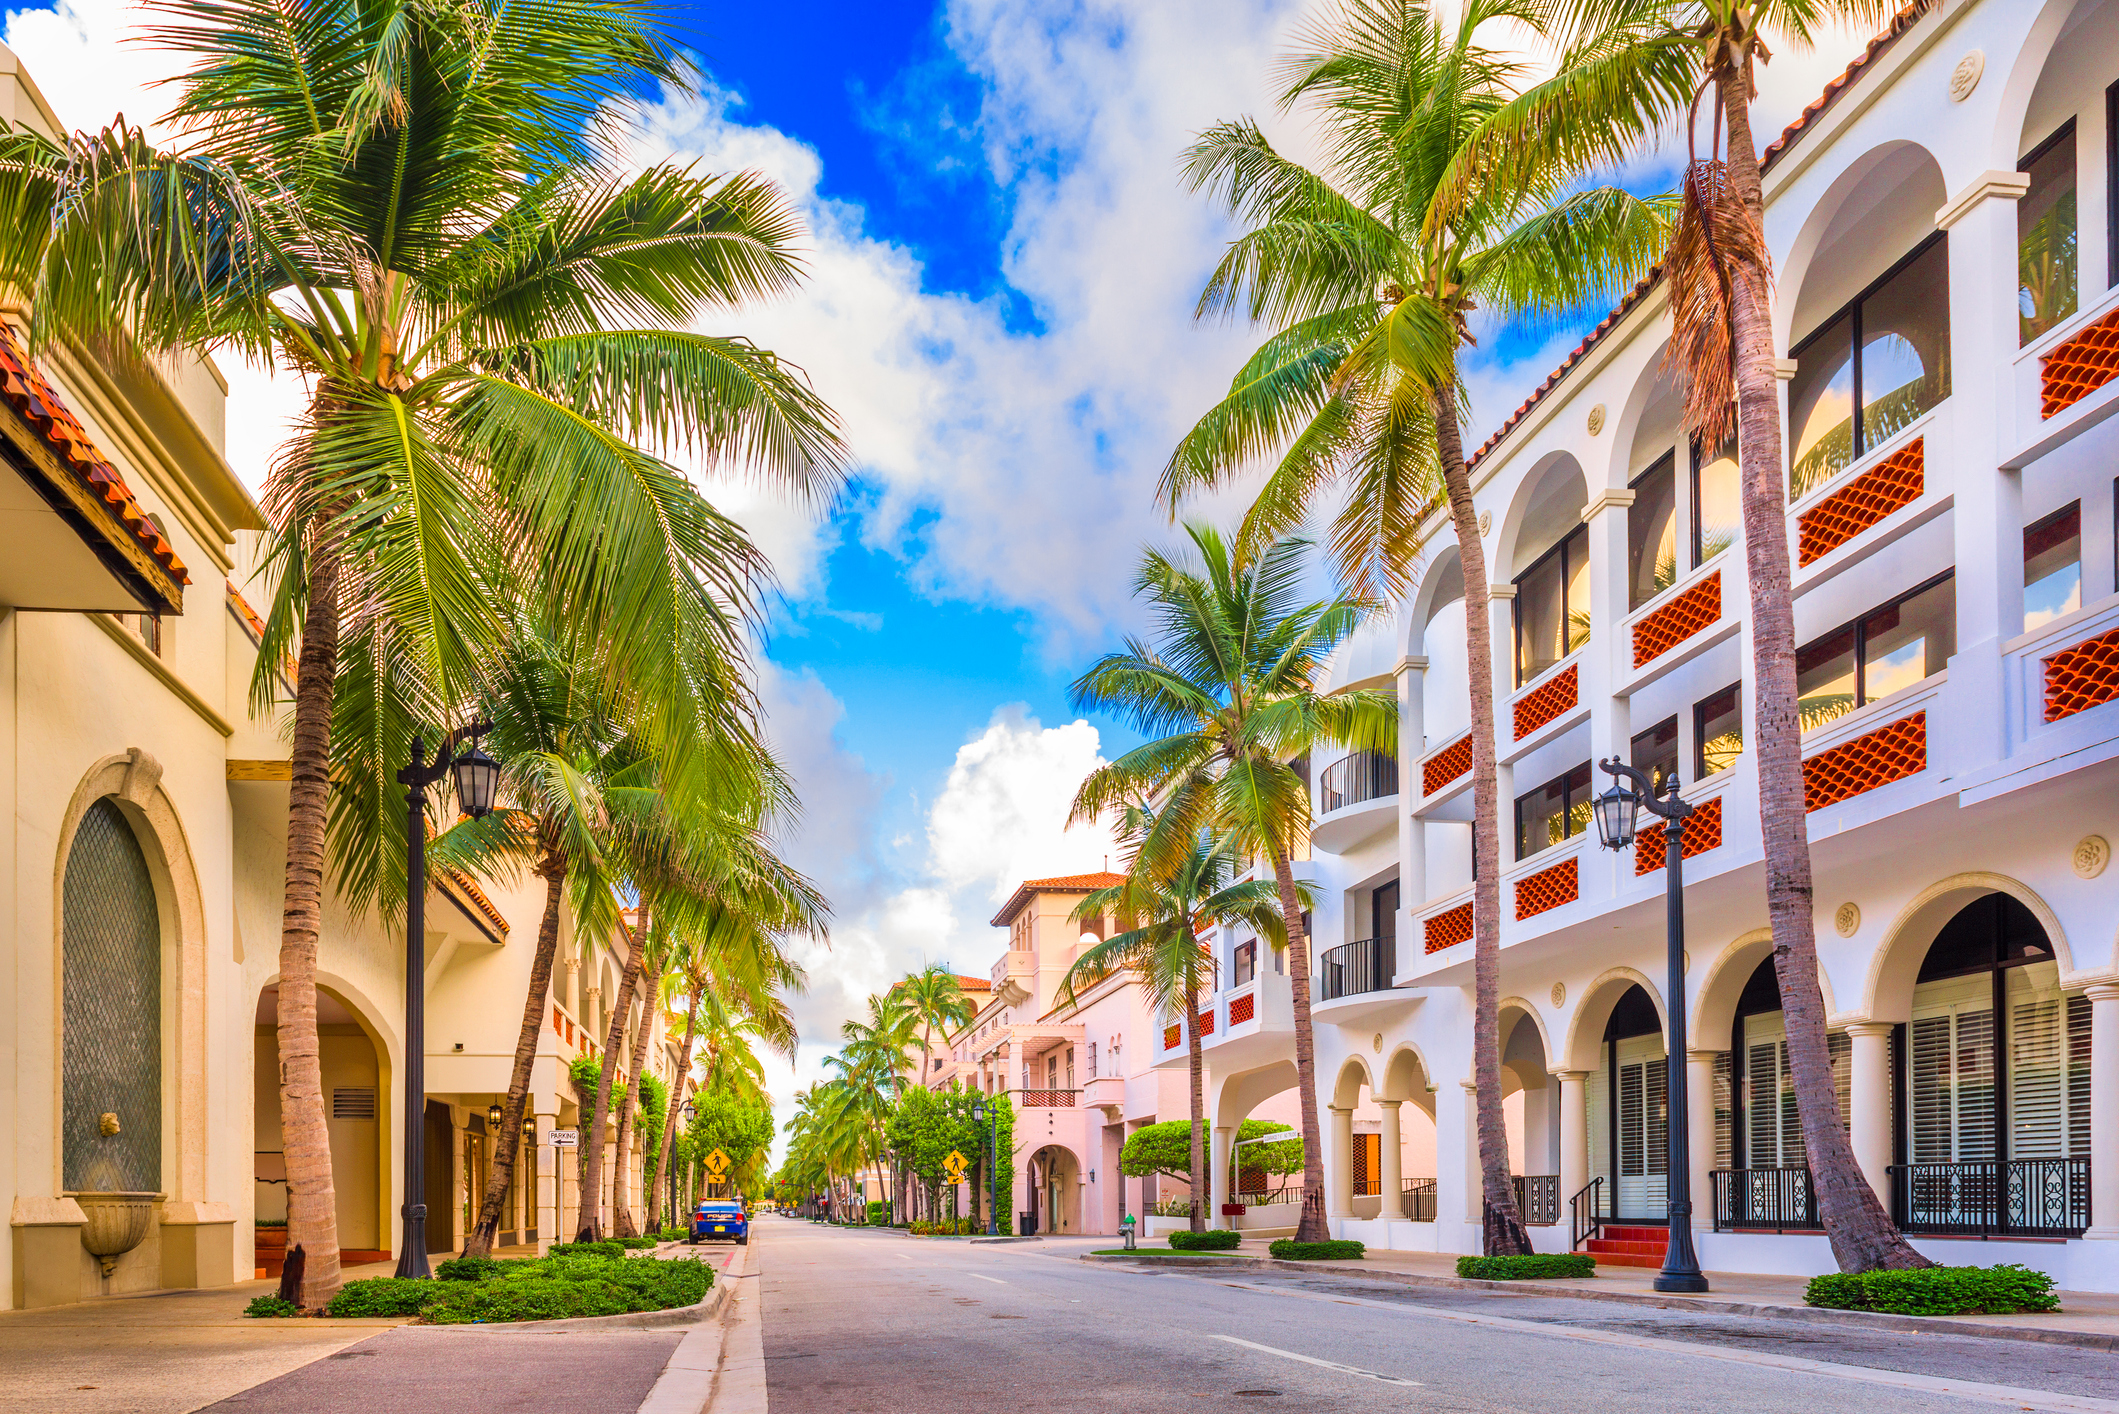 Where to Spot Celebrities in The Palm Beaches